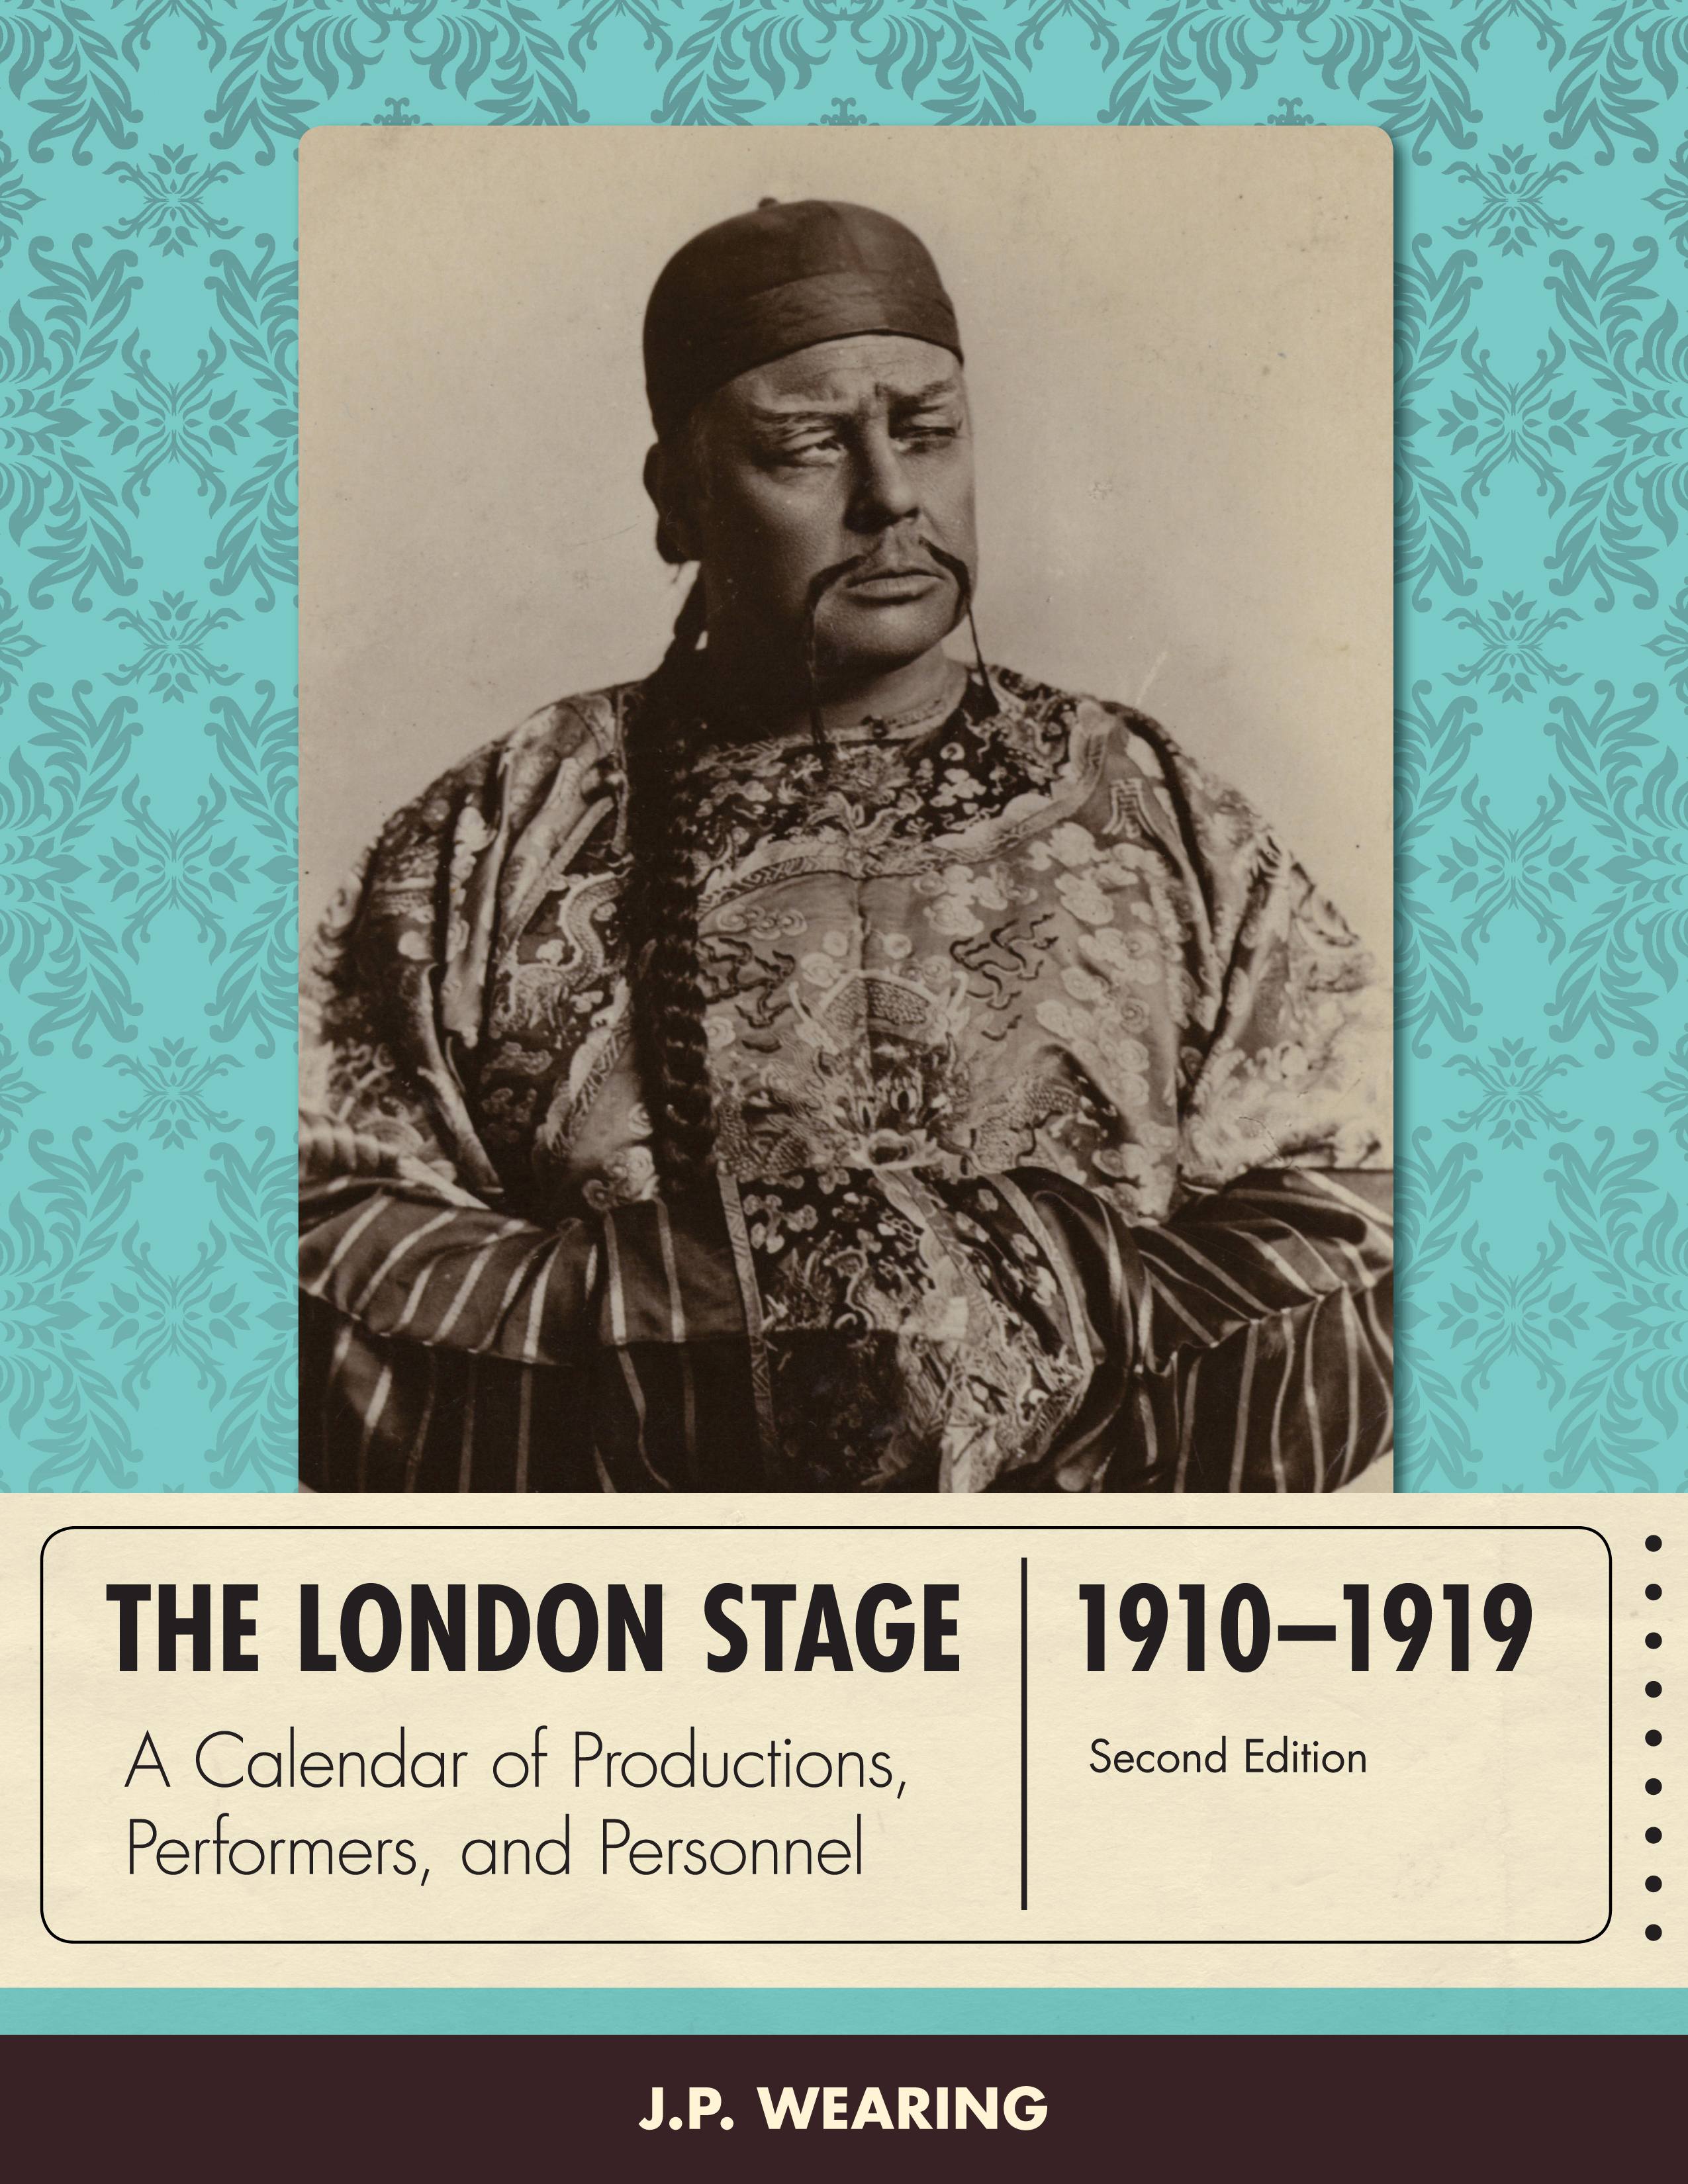 The London Stage 1910-1919: A Calendar of Productions, Performers, and Personnel